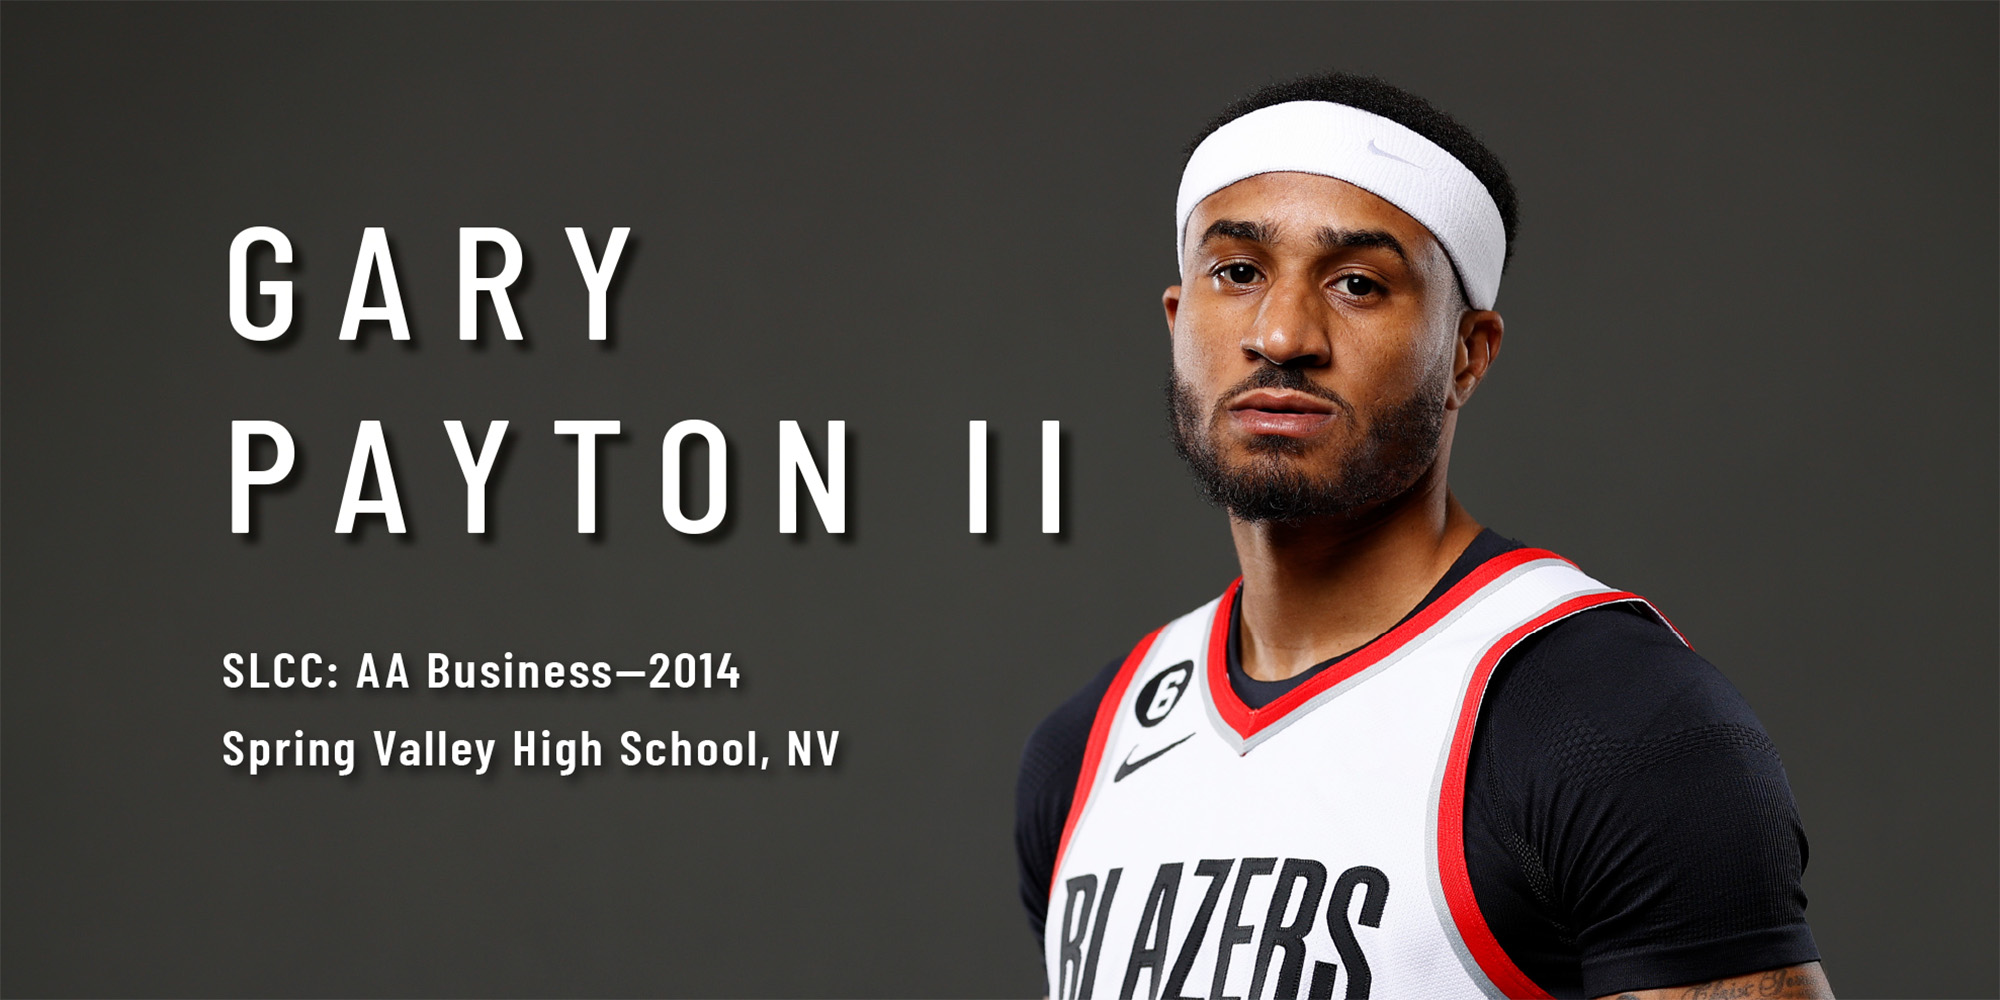 Gary Payton II, SLCC AA Business in 2014, From Spring Valley High School, Nevada